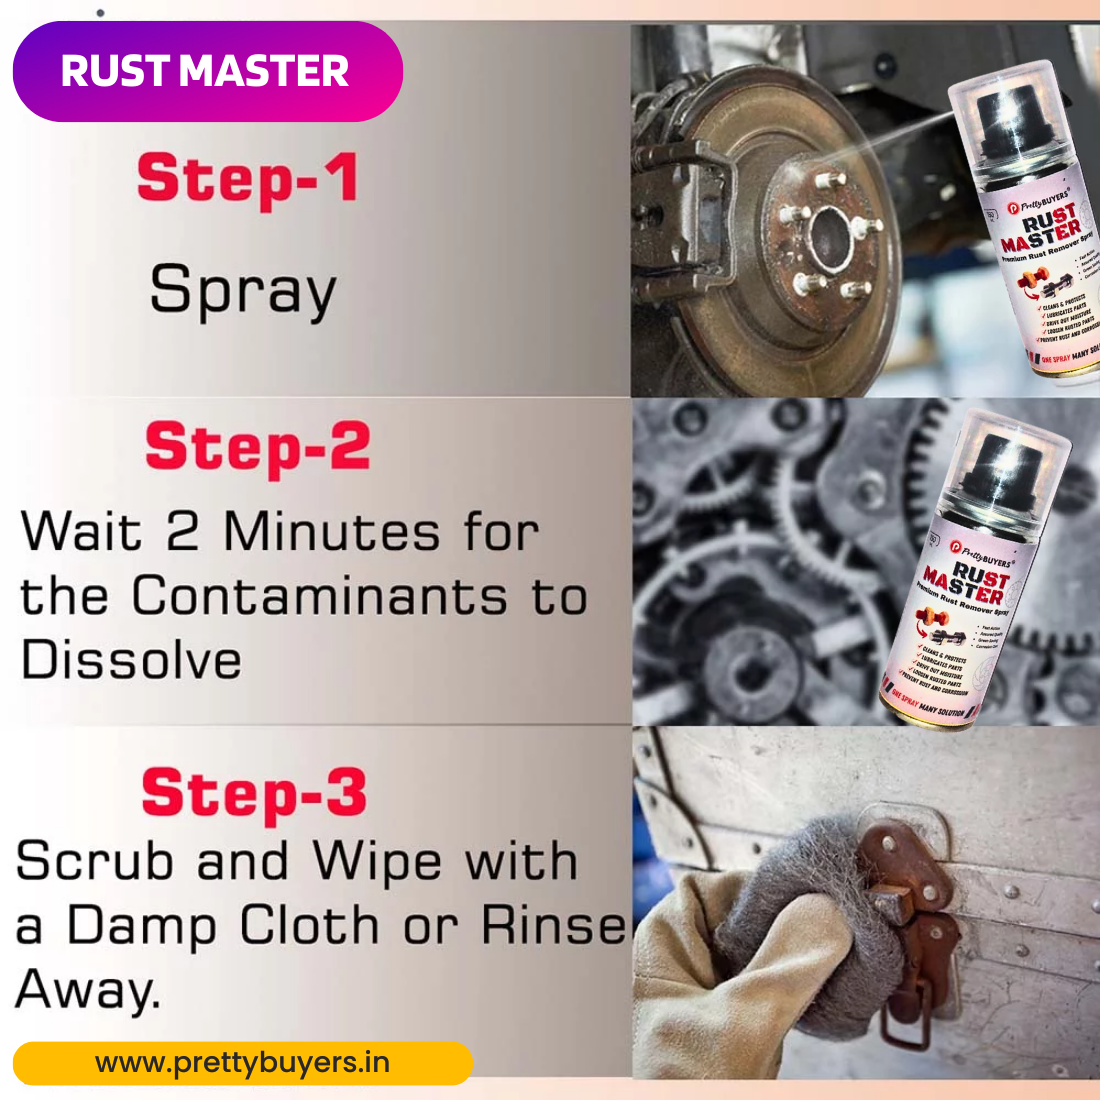 PrettyBUYERS RUST Master - Instant Rust Remover Spray (150 mlx1) | Removes Rust | Protects from Corrosion